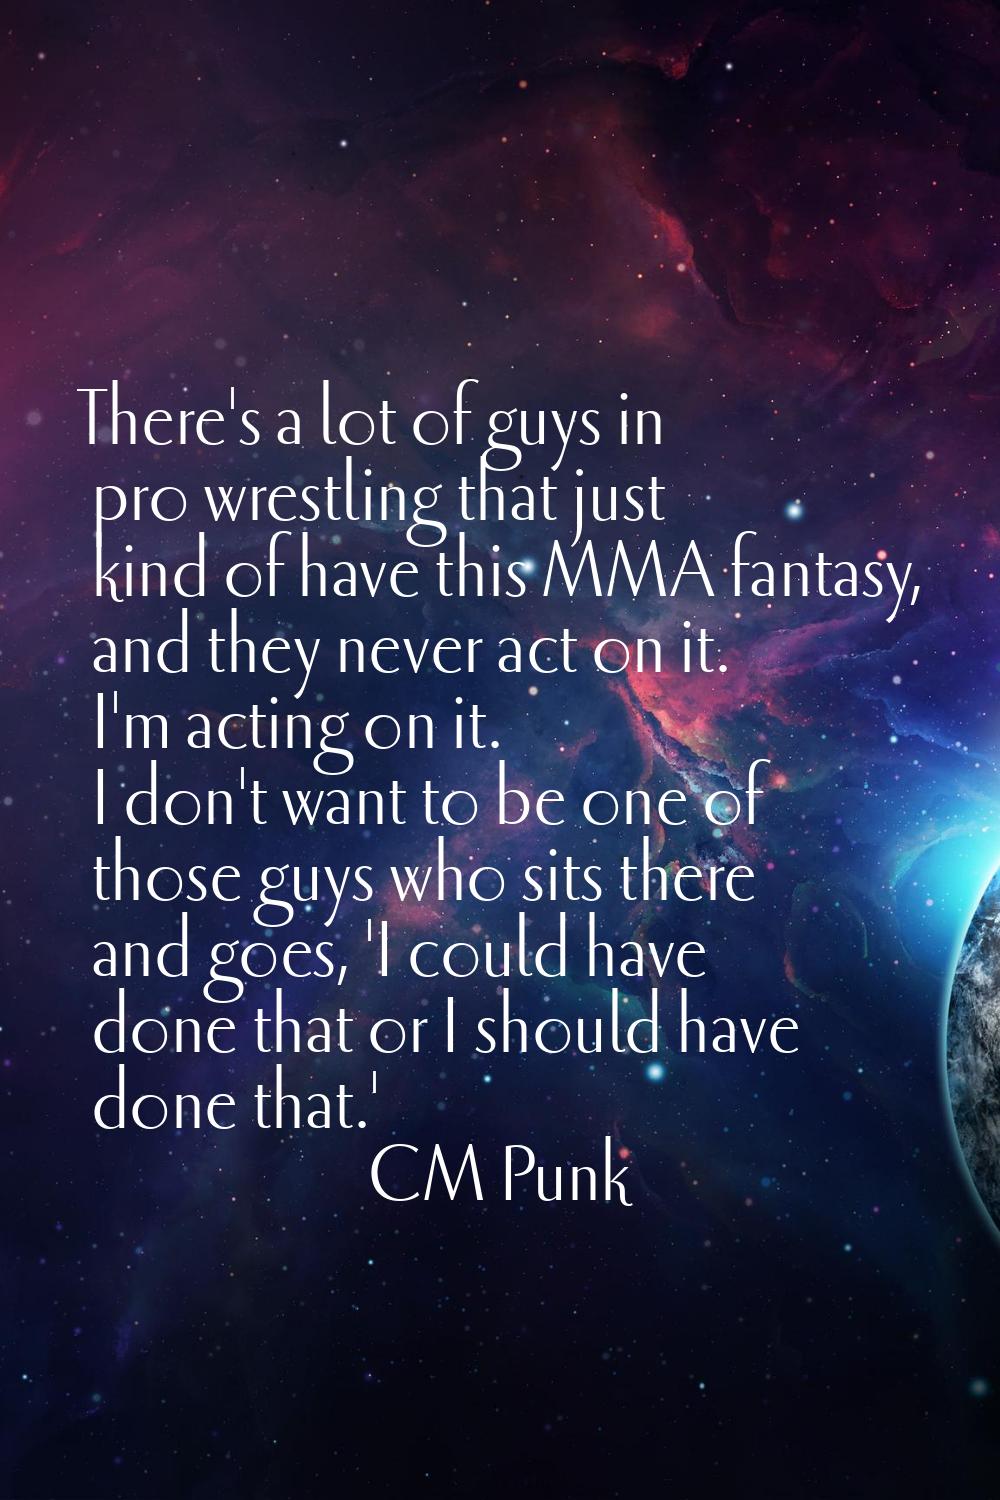 There's a lot of guys in pro wrestling that just kind of have this MMA fantasy, and they never act 